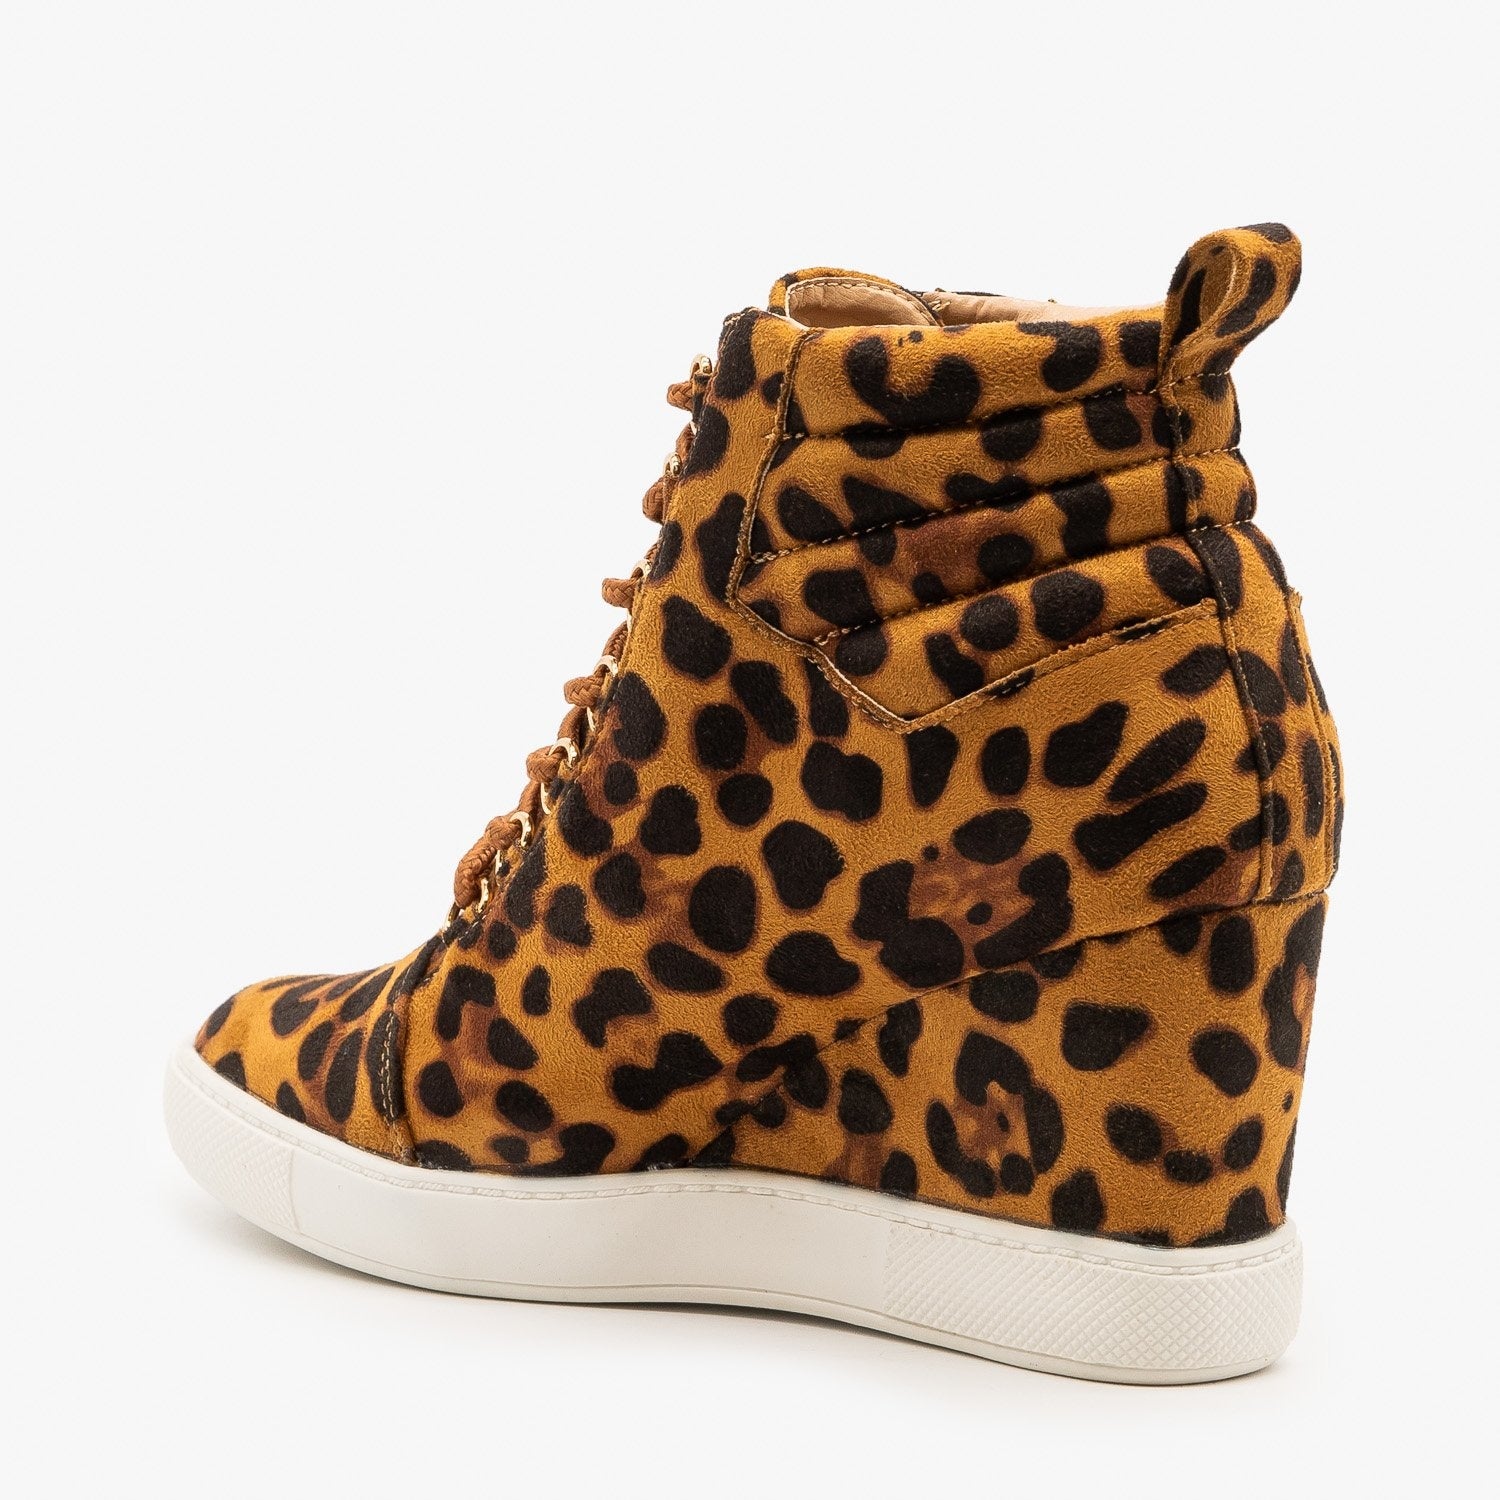 Leopard Lace Up Sneaker Wedges - AMS 